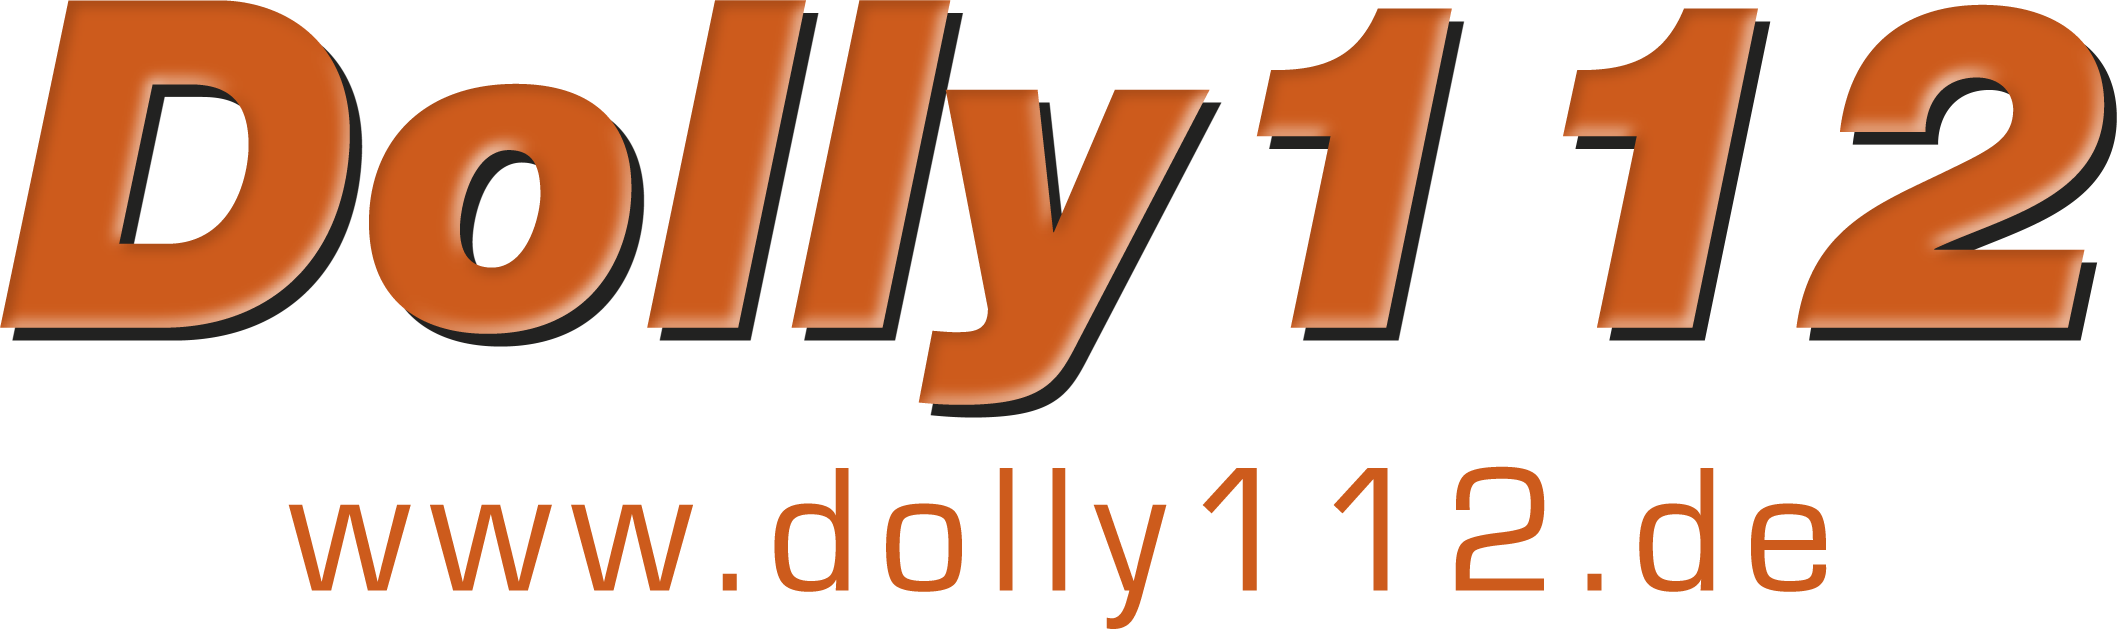 Dolly112_2014.png